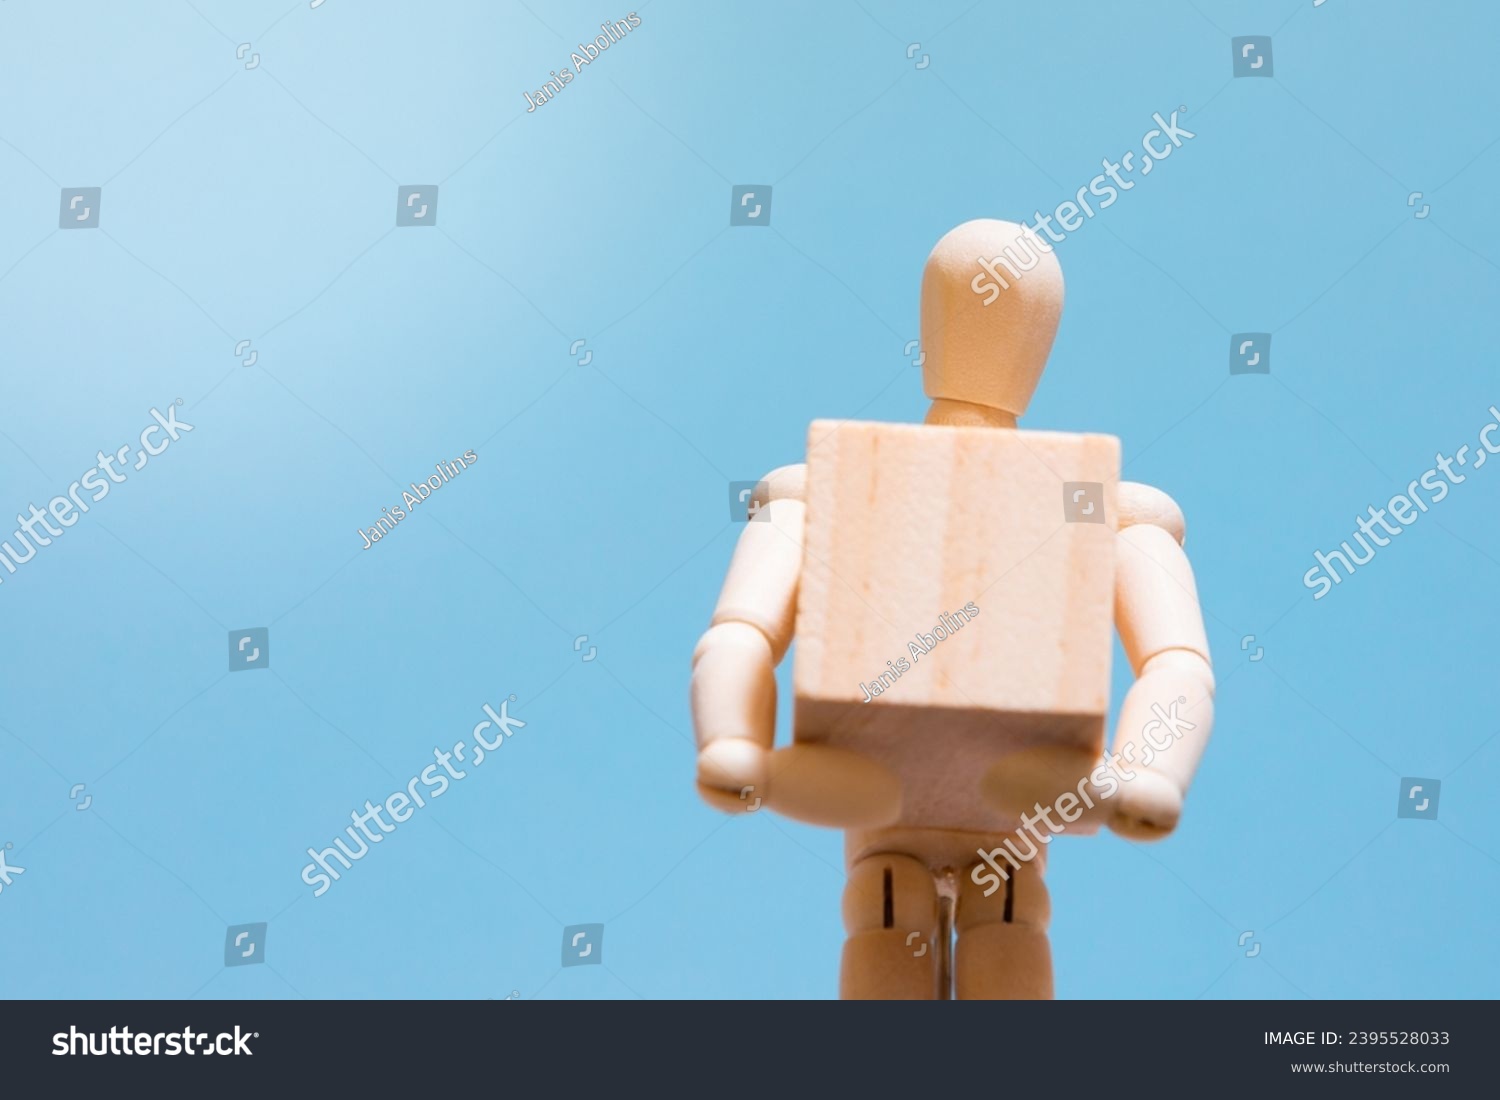 Manual handling at work. Wooden manikin holding a box. Handling technique. Health and safety at work. #2395528033